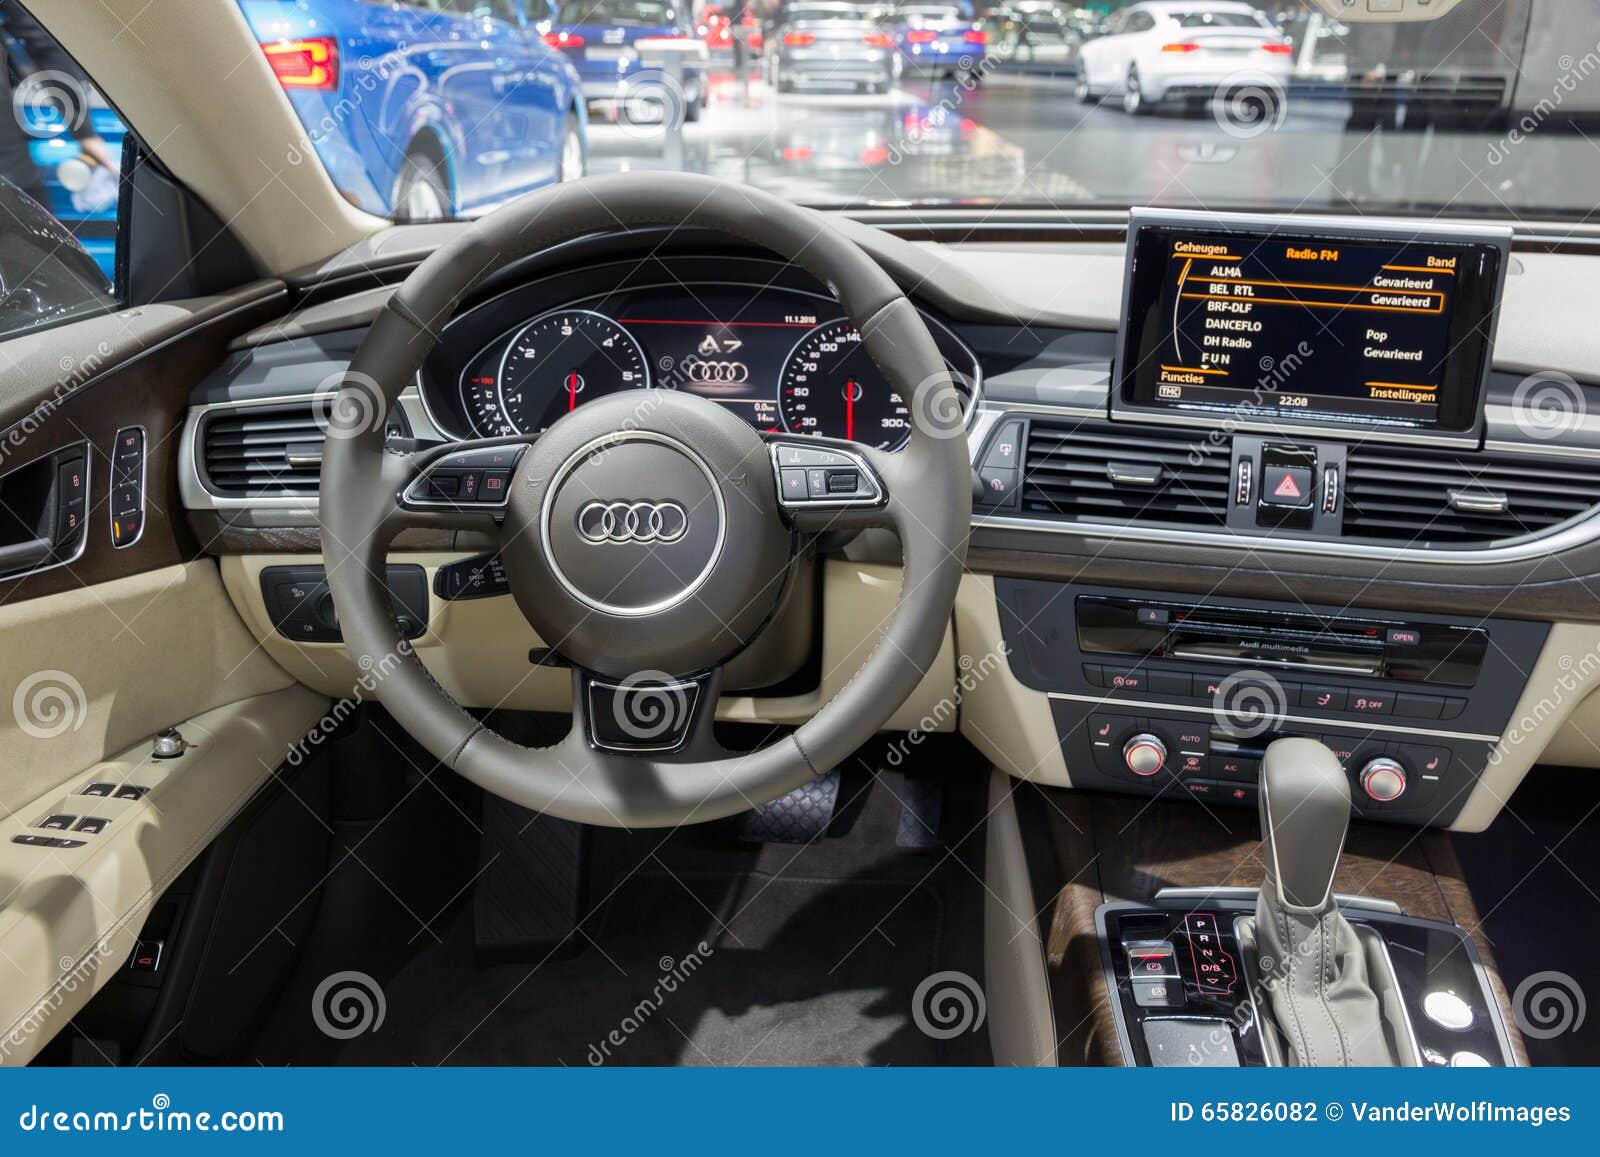 Audi A7 Interior Editorial Photography Image Of Inside